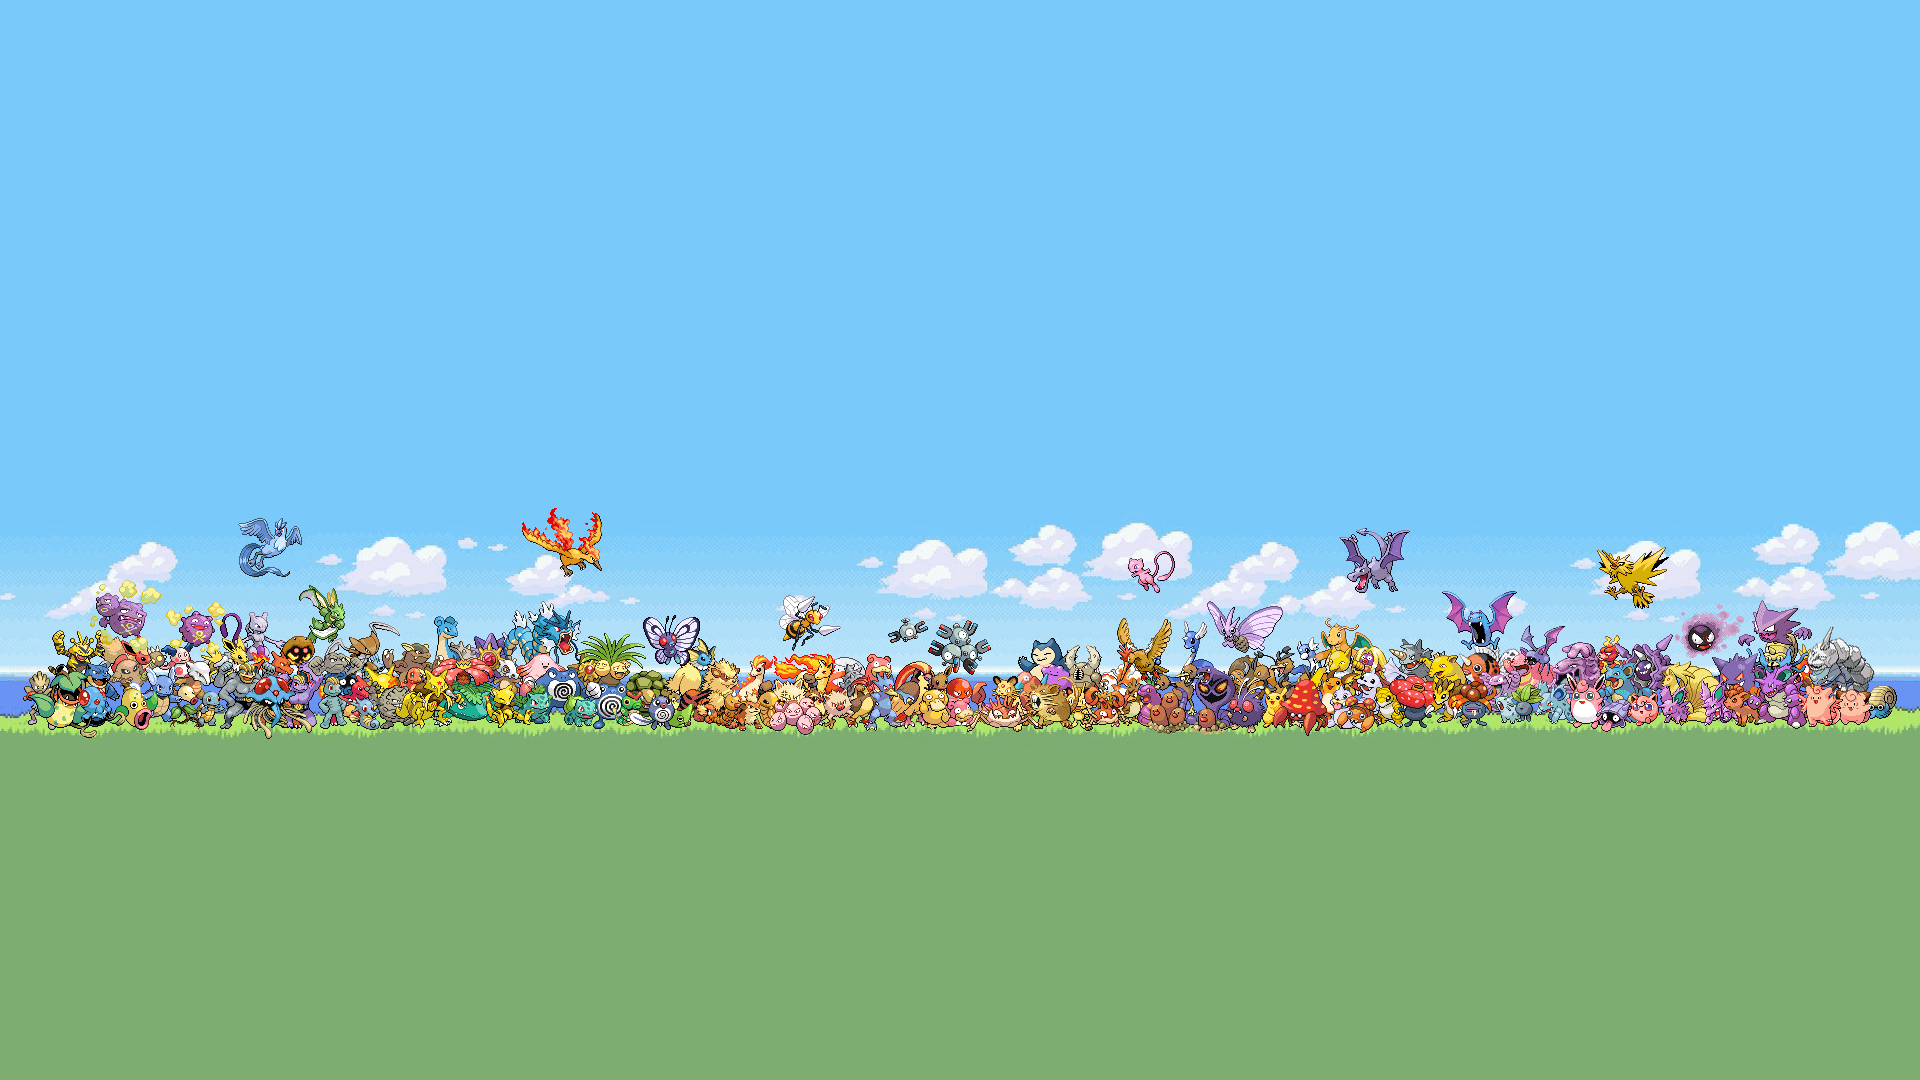 What are your favorite Pokemon wallpaper?